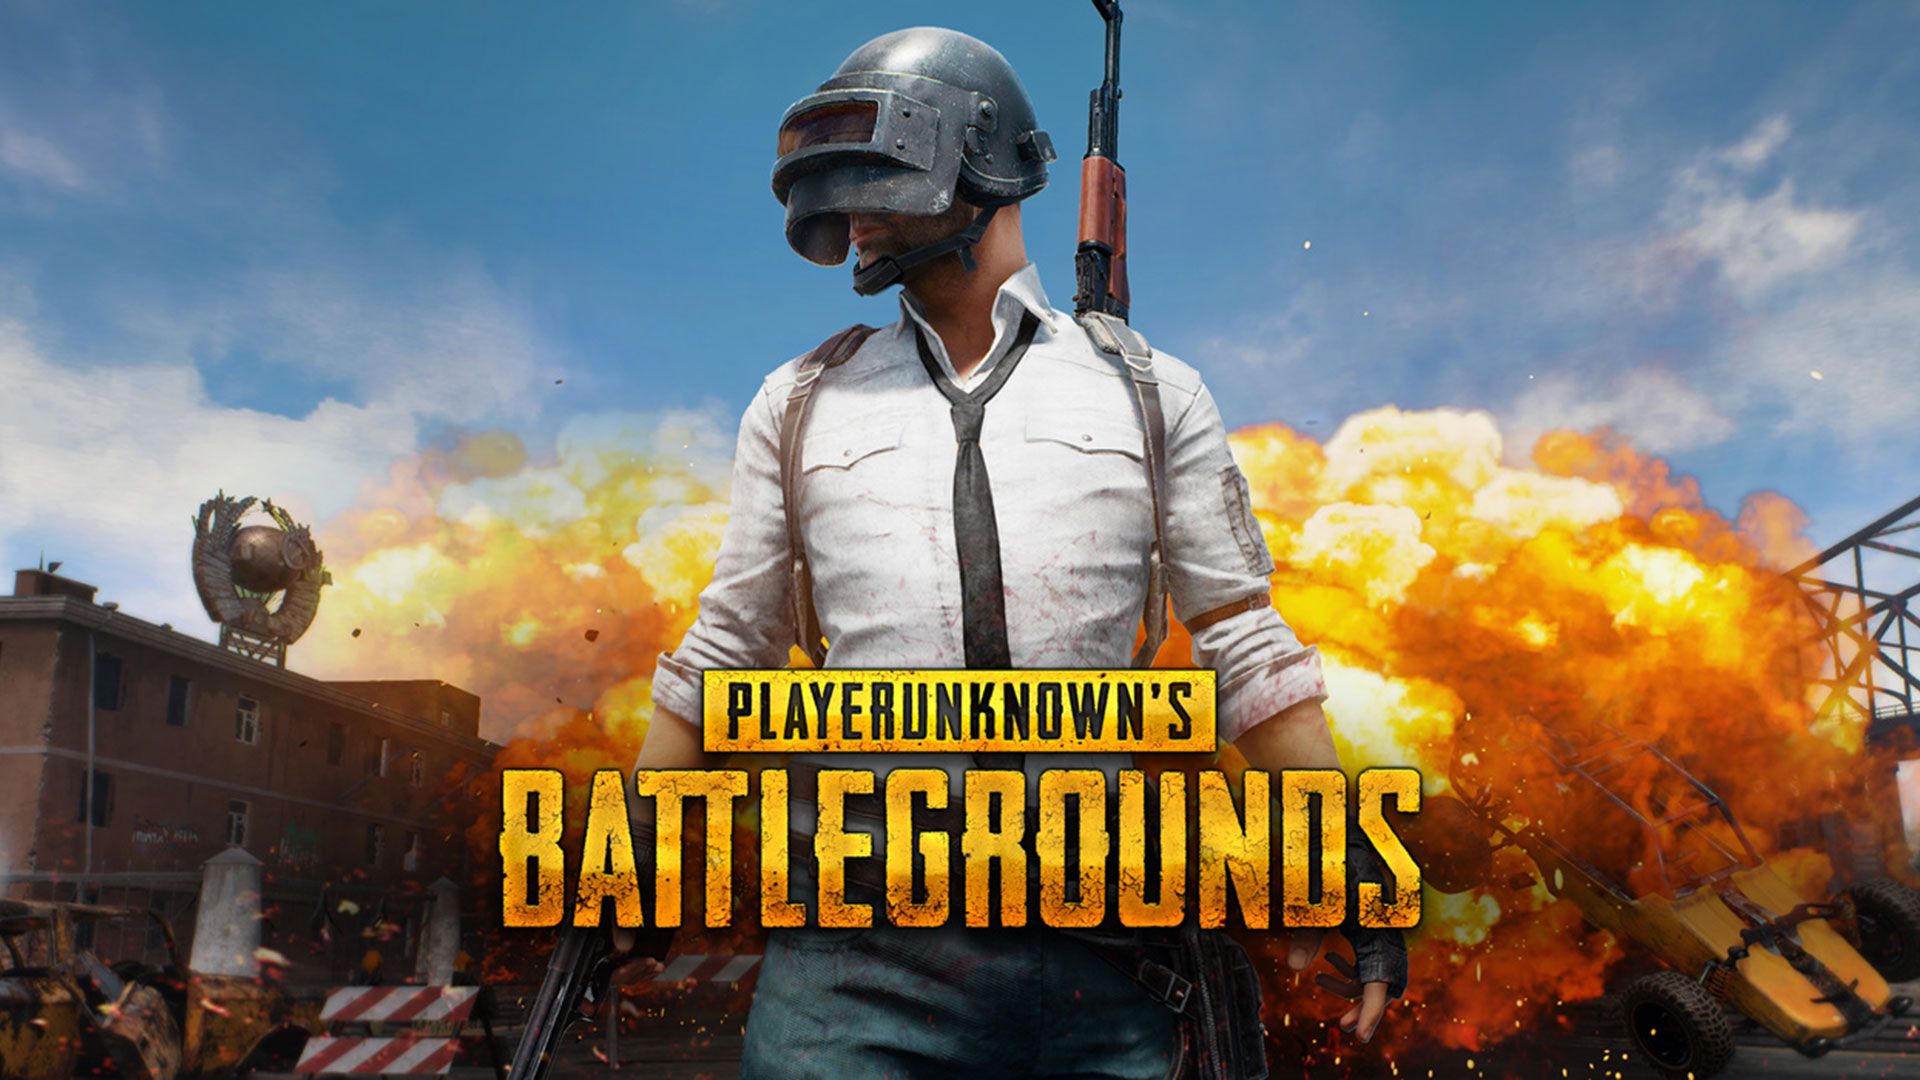 Get Pubg Wallpaper Full HD On 1080p To Your